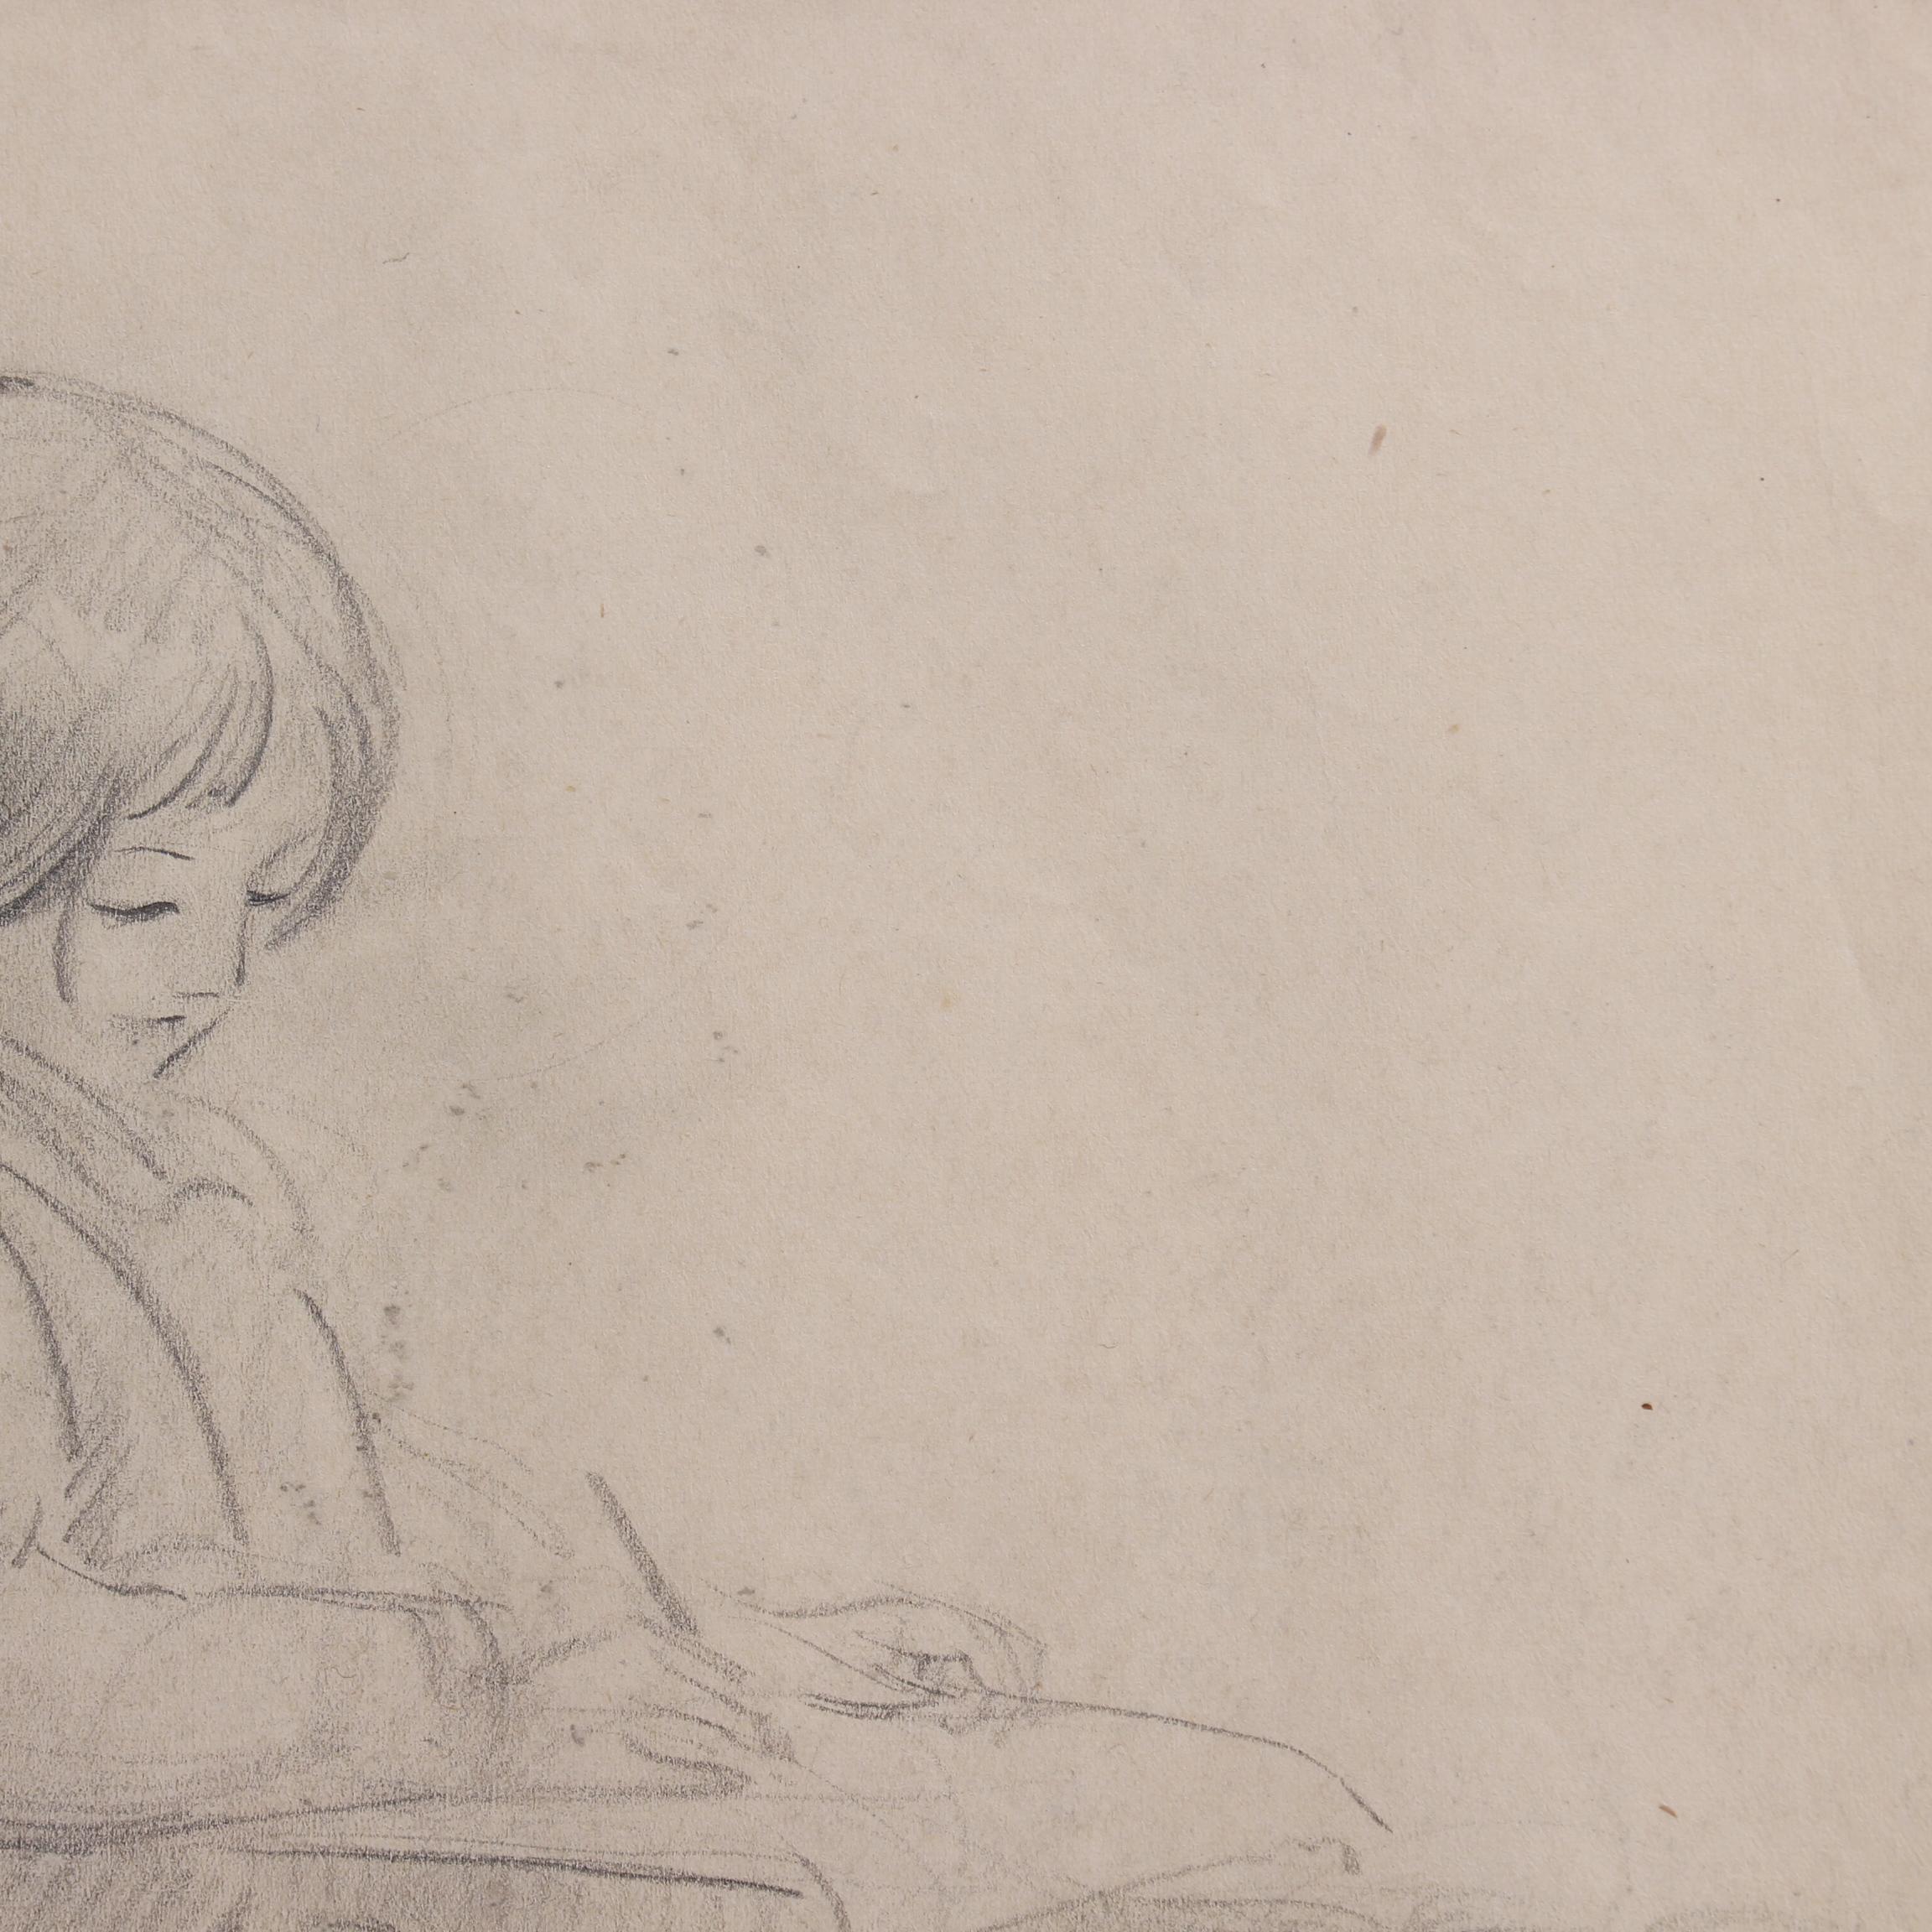 'Portrait of a Young Girl Writing', pencil on art paper, by French artist, Guillaume Dulac (circa 1920s). An artist known for his exquisite drawings - many are sketches for his larger oil paintings or other works, this piece's beauty lies in its